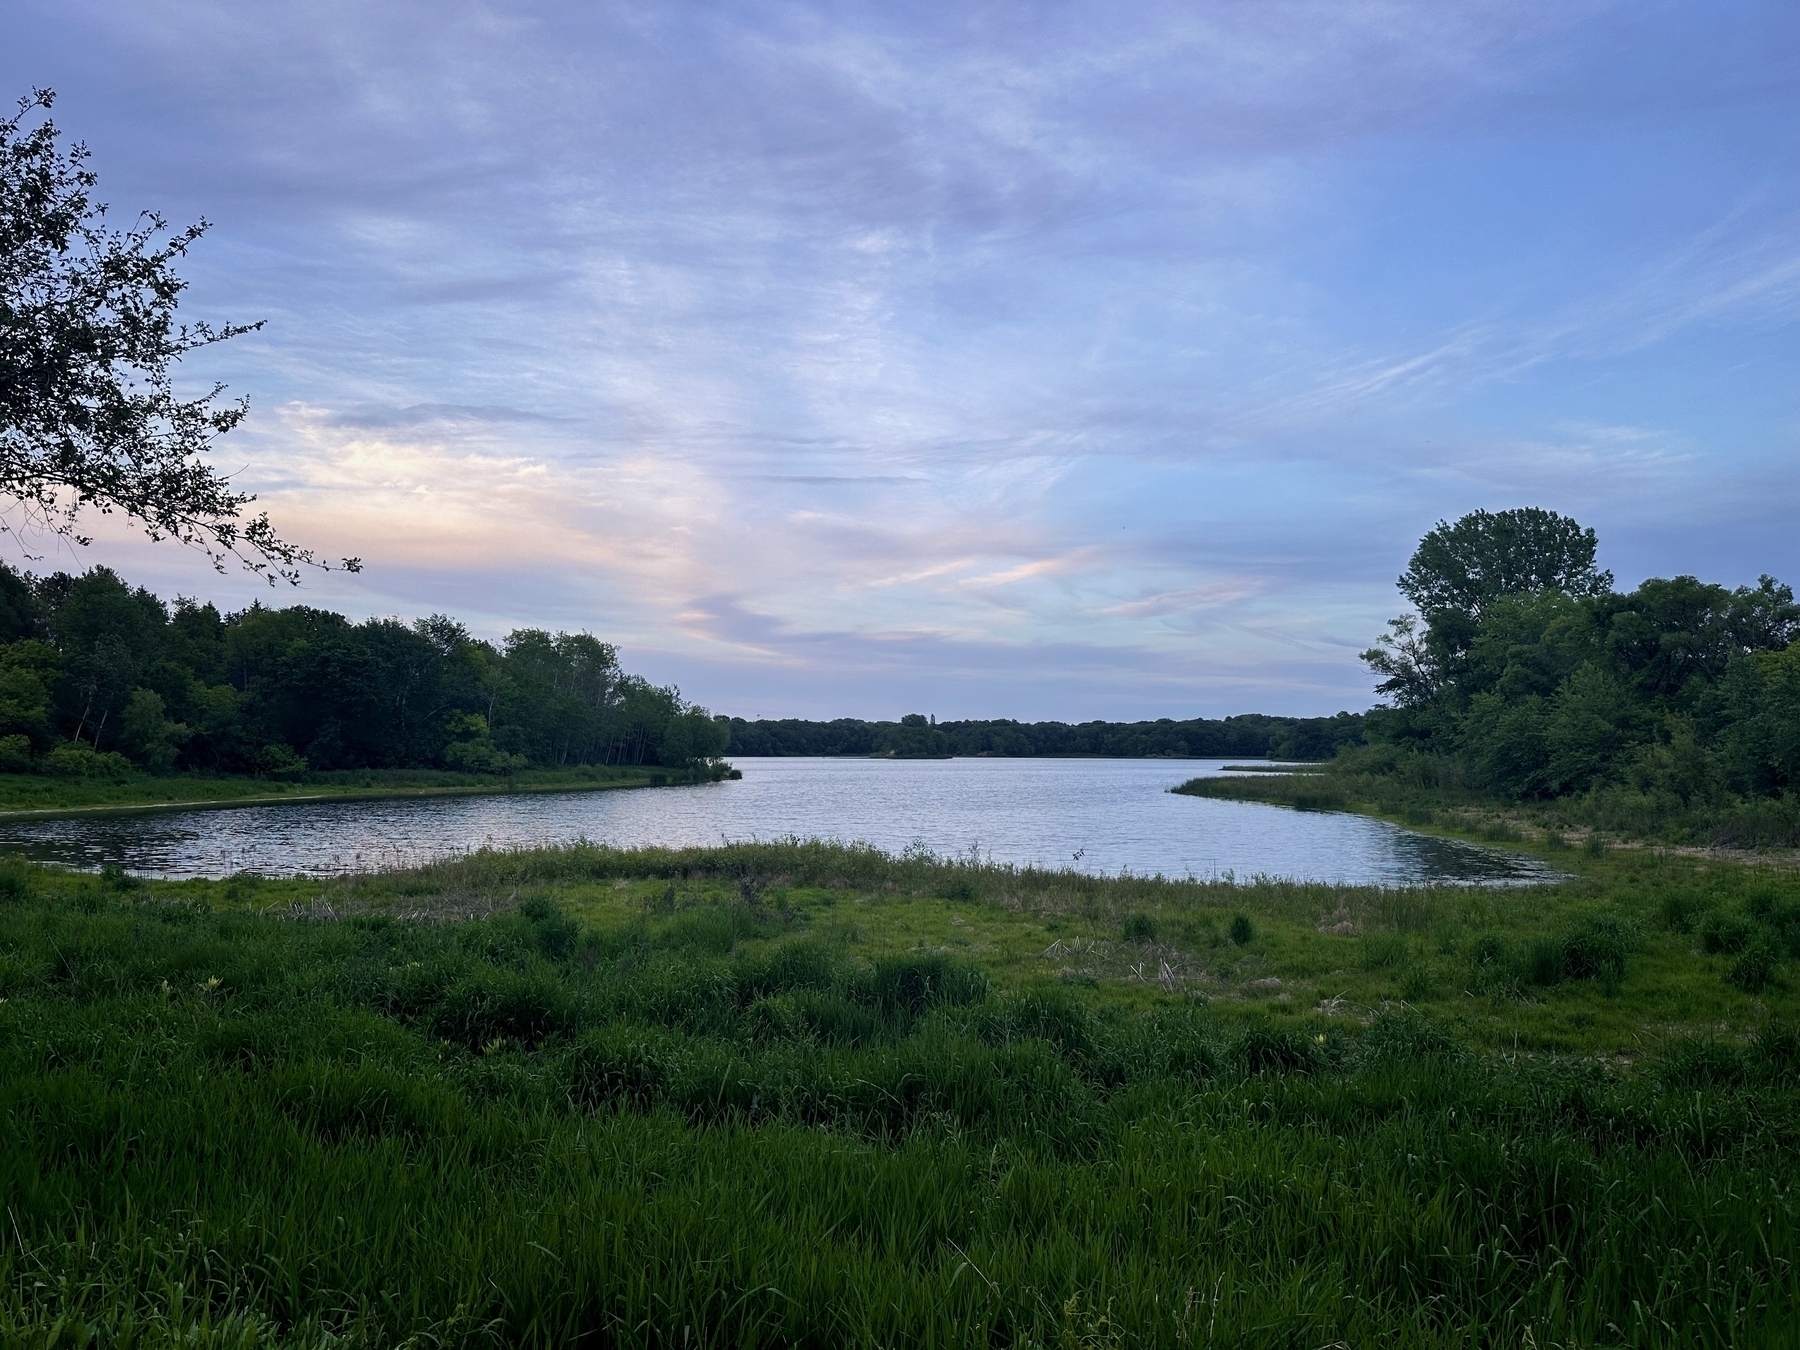 Lake reflecting sky at dusk surrounded by green grass and trees with a calm water surface and a partially cloudy sky above.